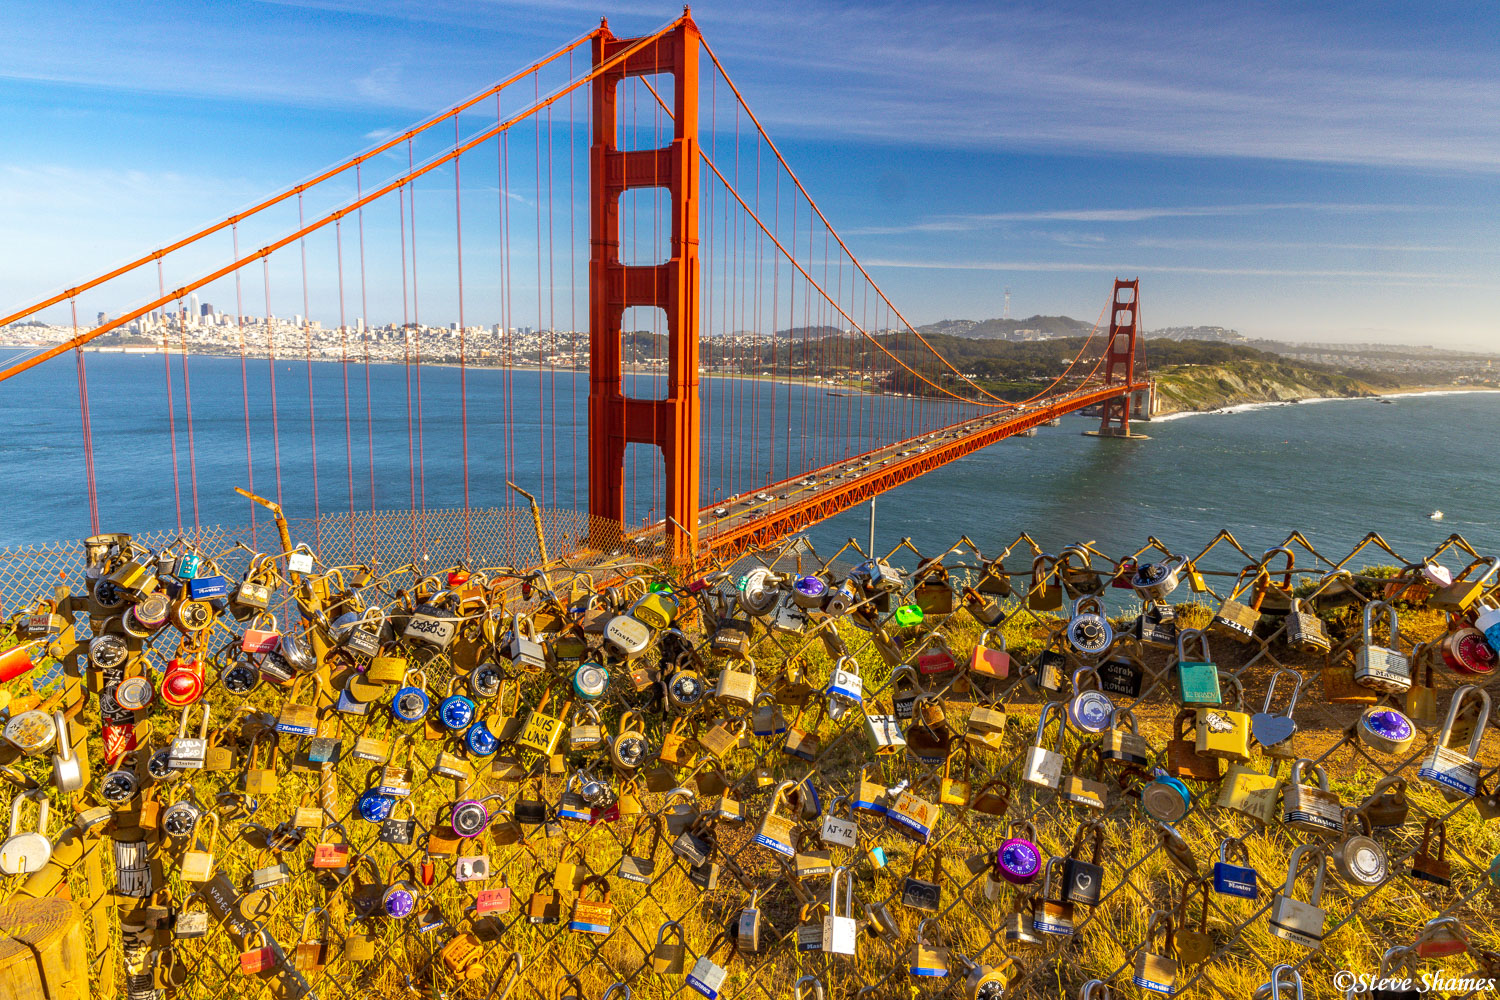 All these padlocks on the fence in front of the Golden Gate Bridge made for an interesting scene.